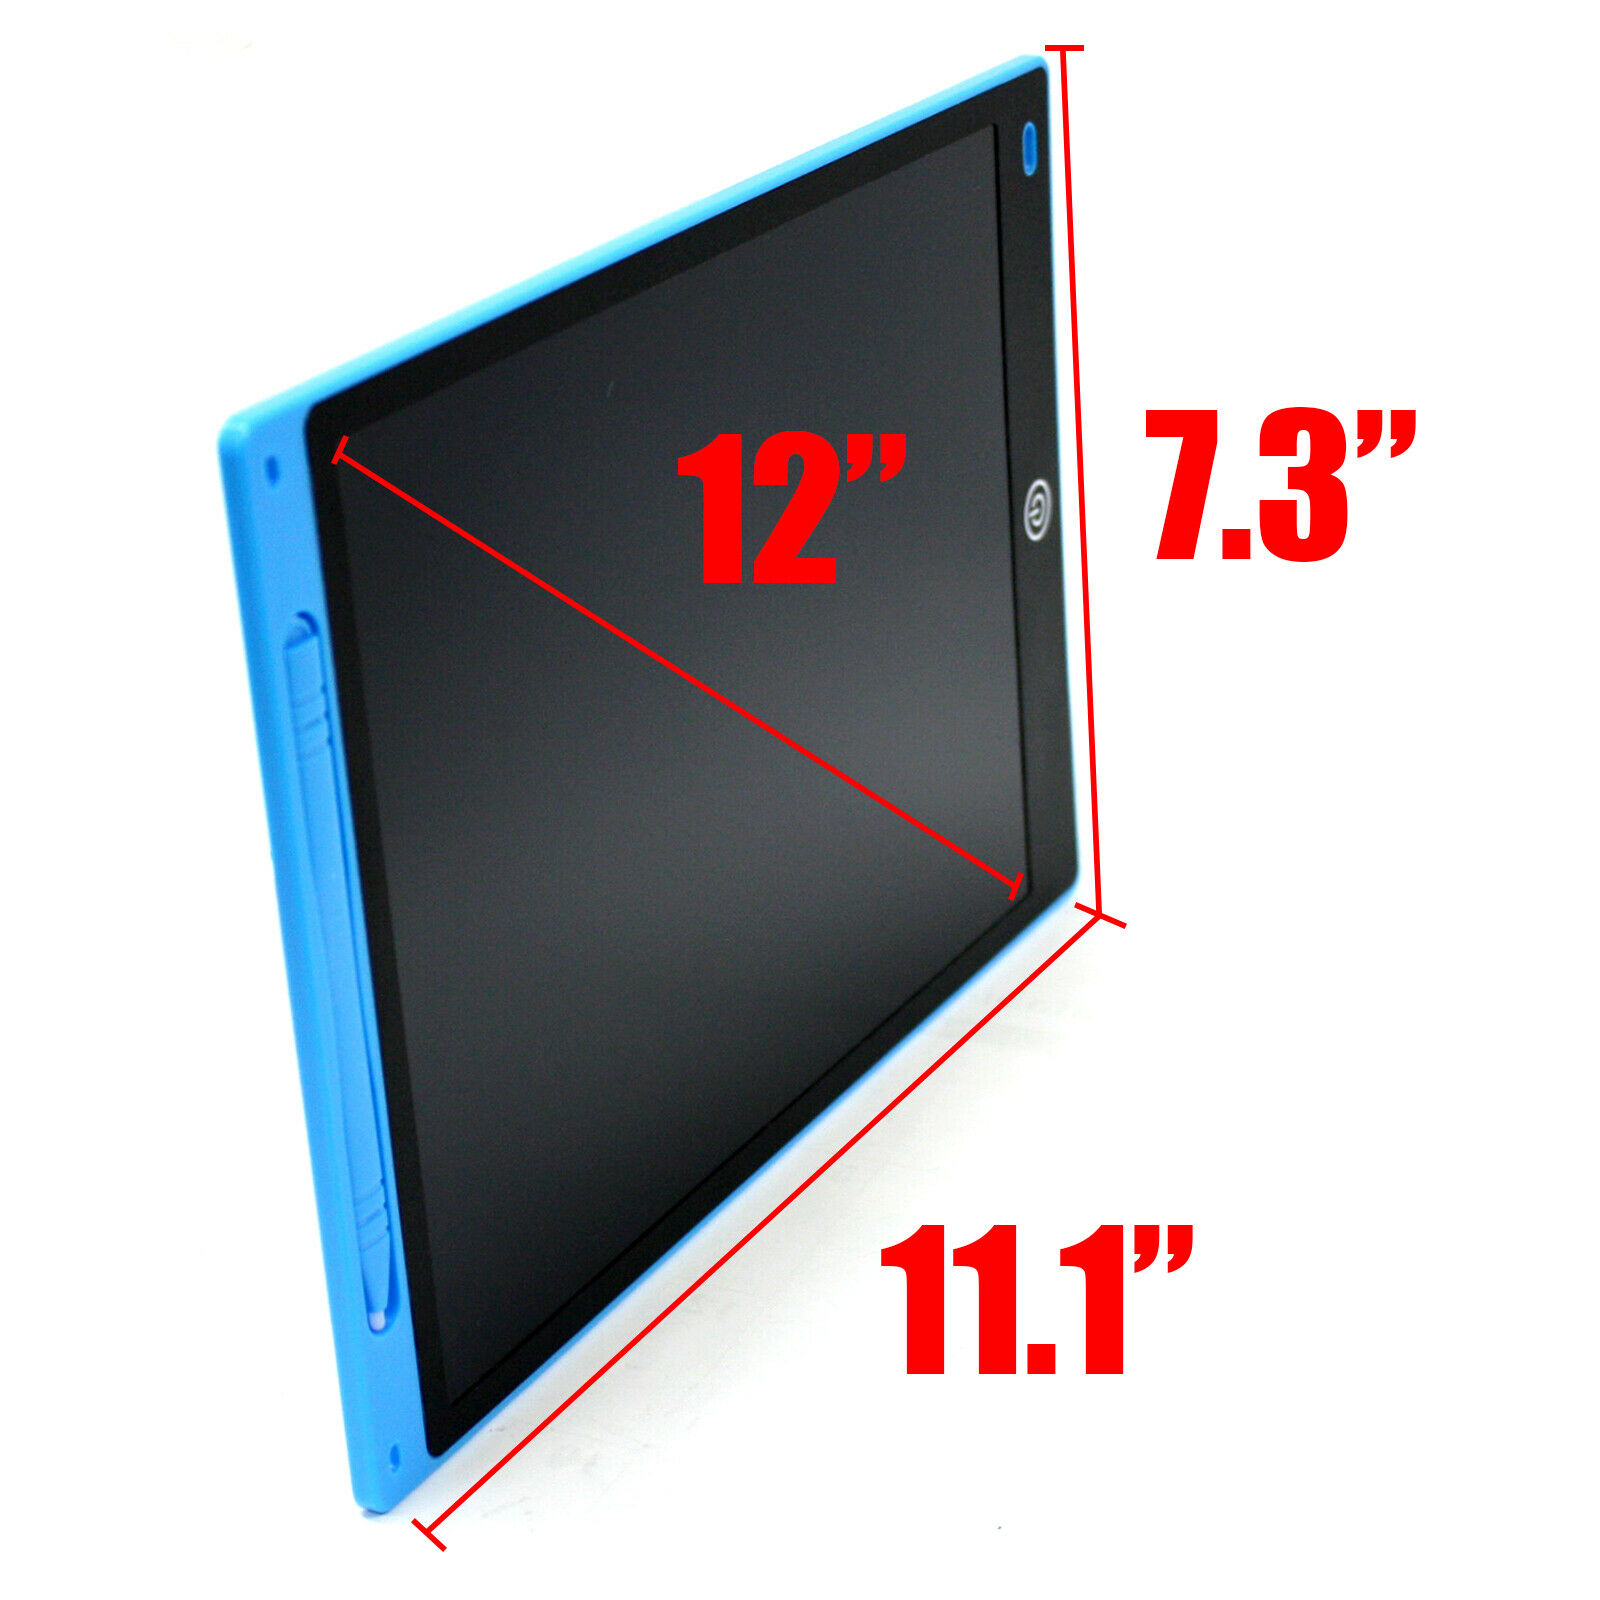 12" Inch LCD Writing Tablet Graphic Pad Board Stylus Drawing eWriter Notepad 